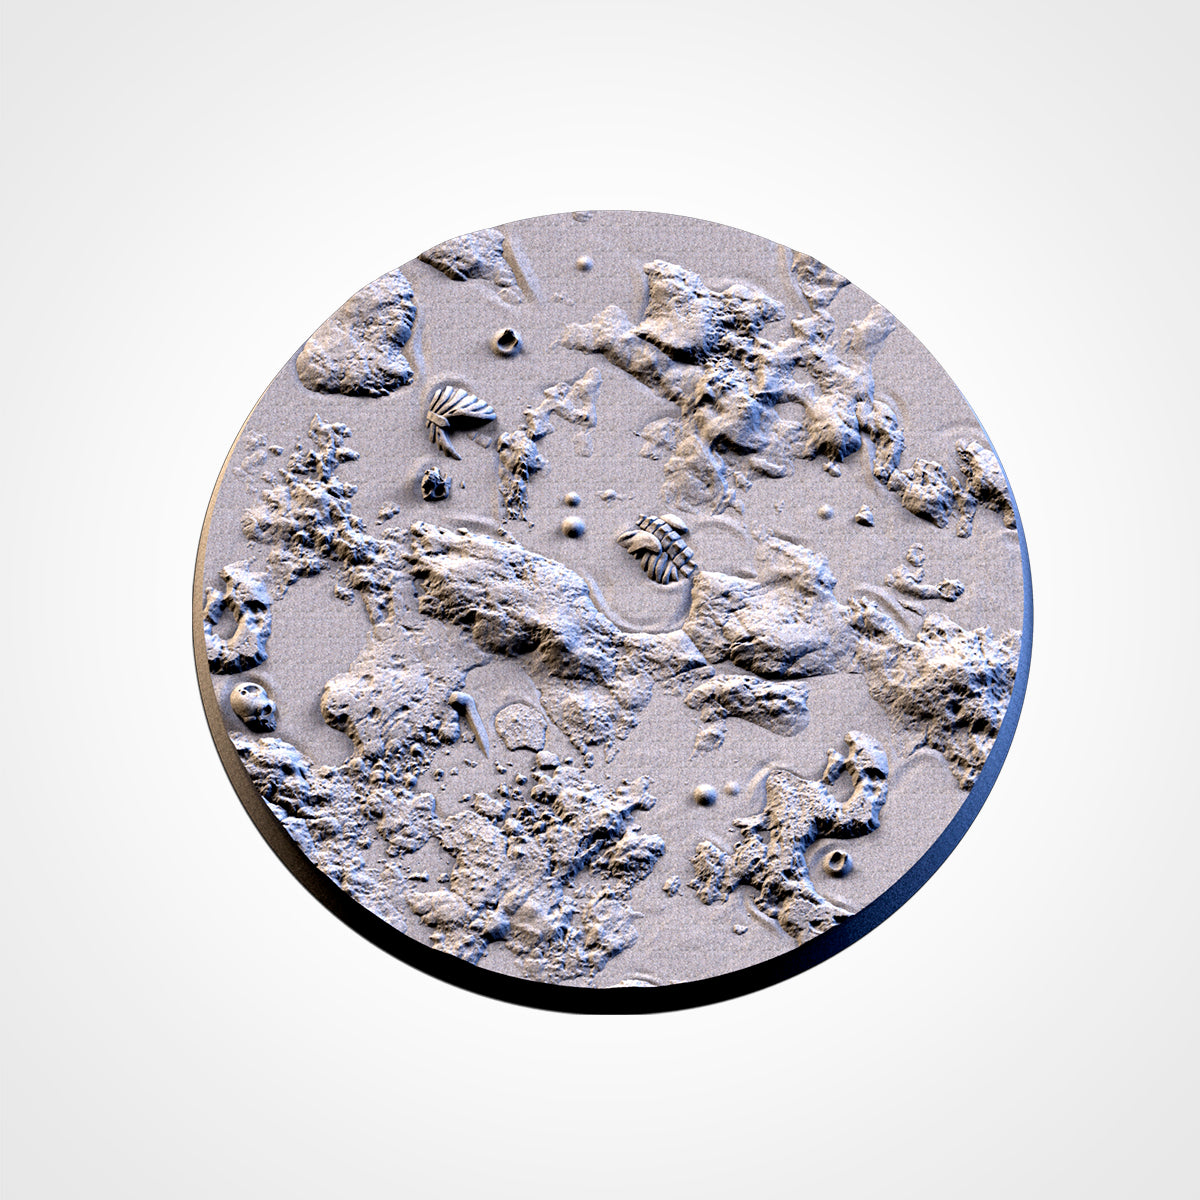 Swamp Bases | 25mm | 32mm | 40mm | Txarli Factory | Magnetizable Scenic Textured Round